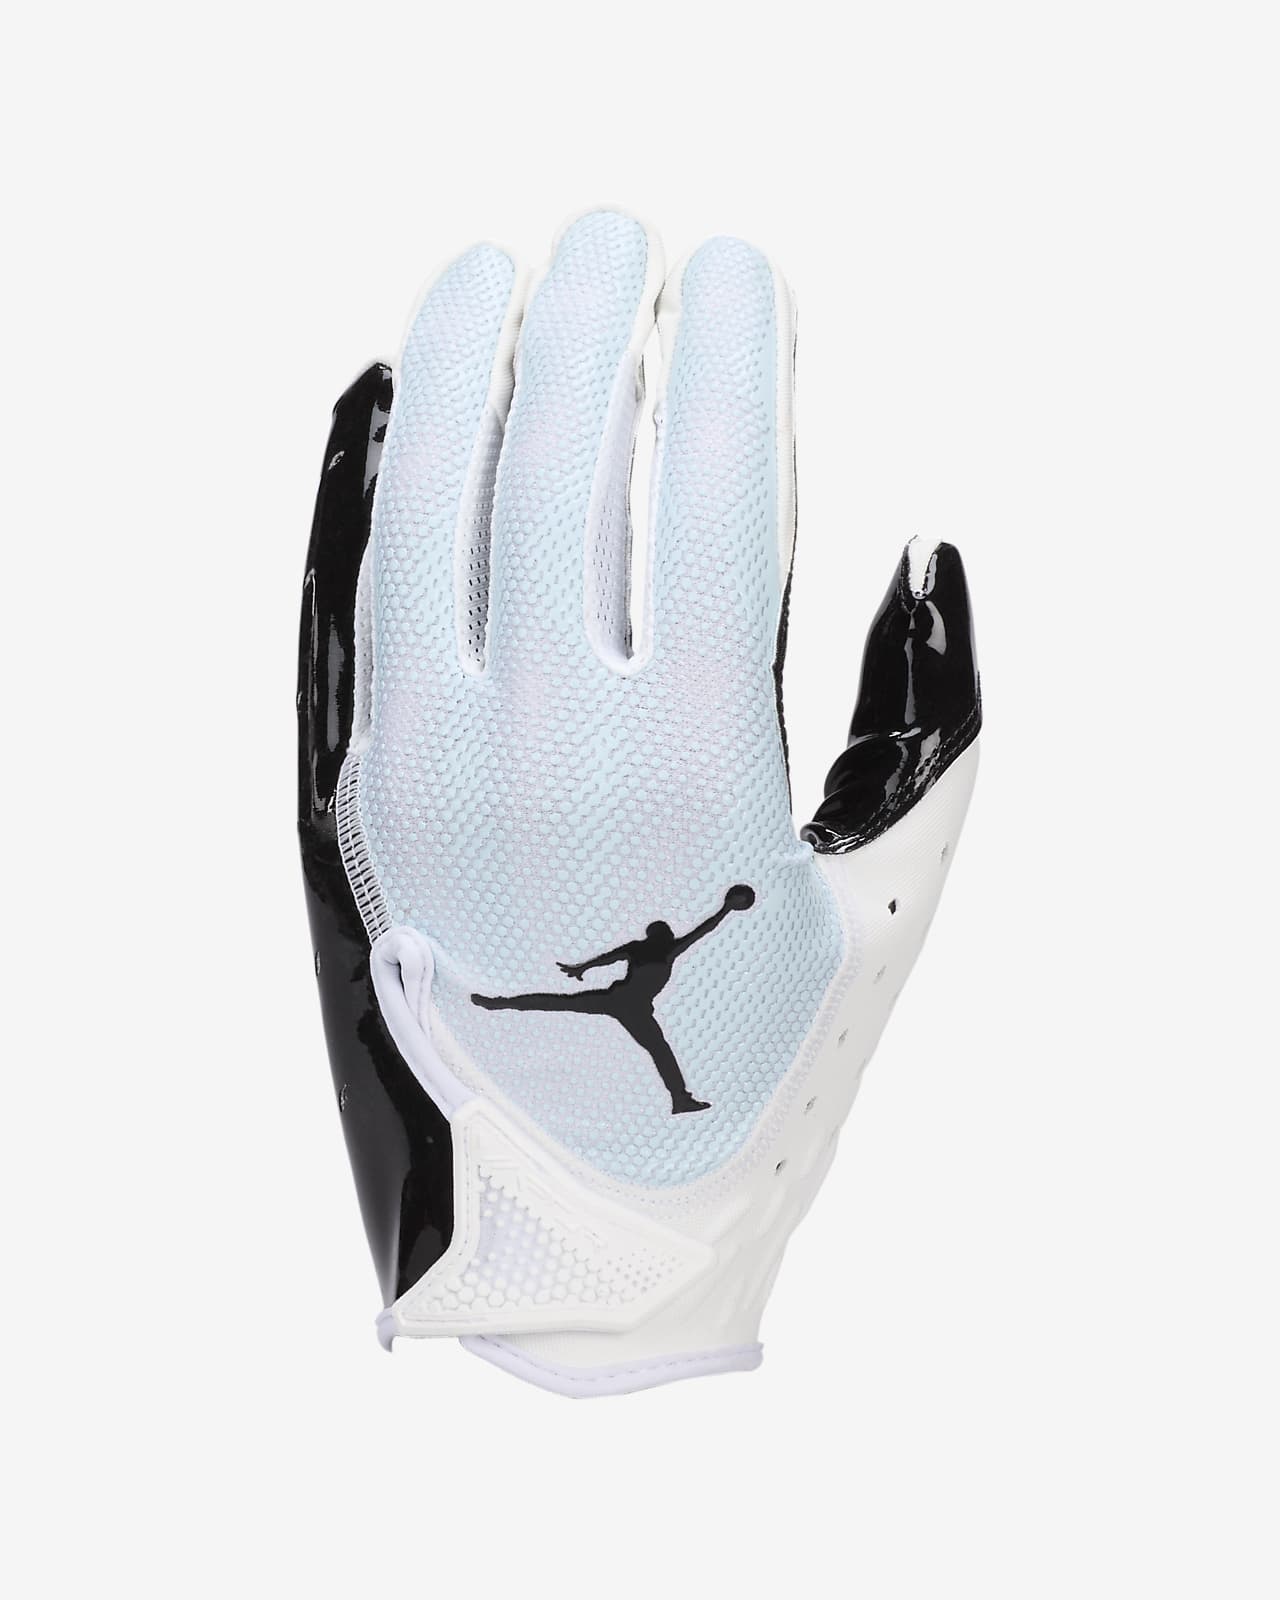 The Best Nike Football Gloves to Wear This Season.